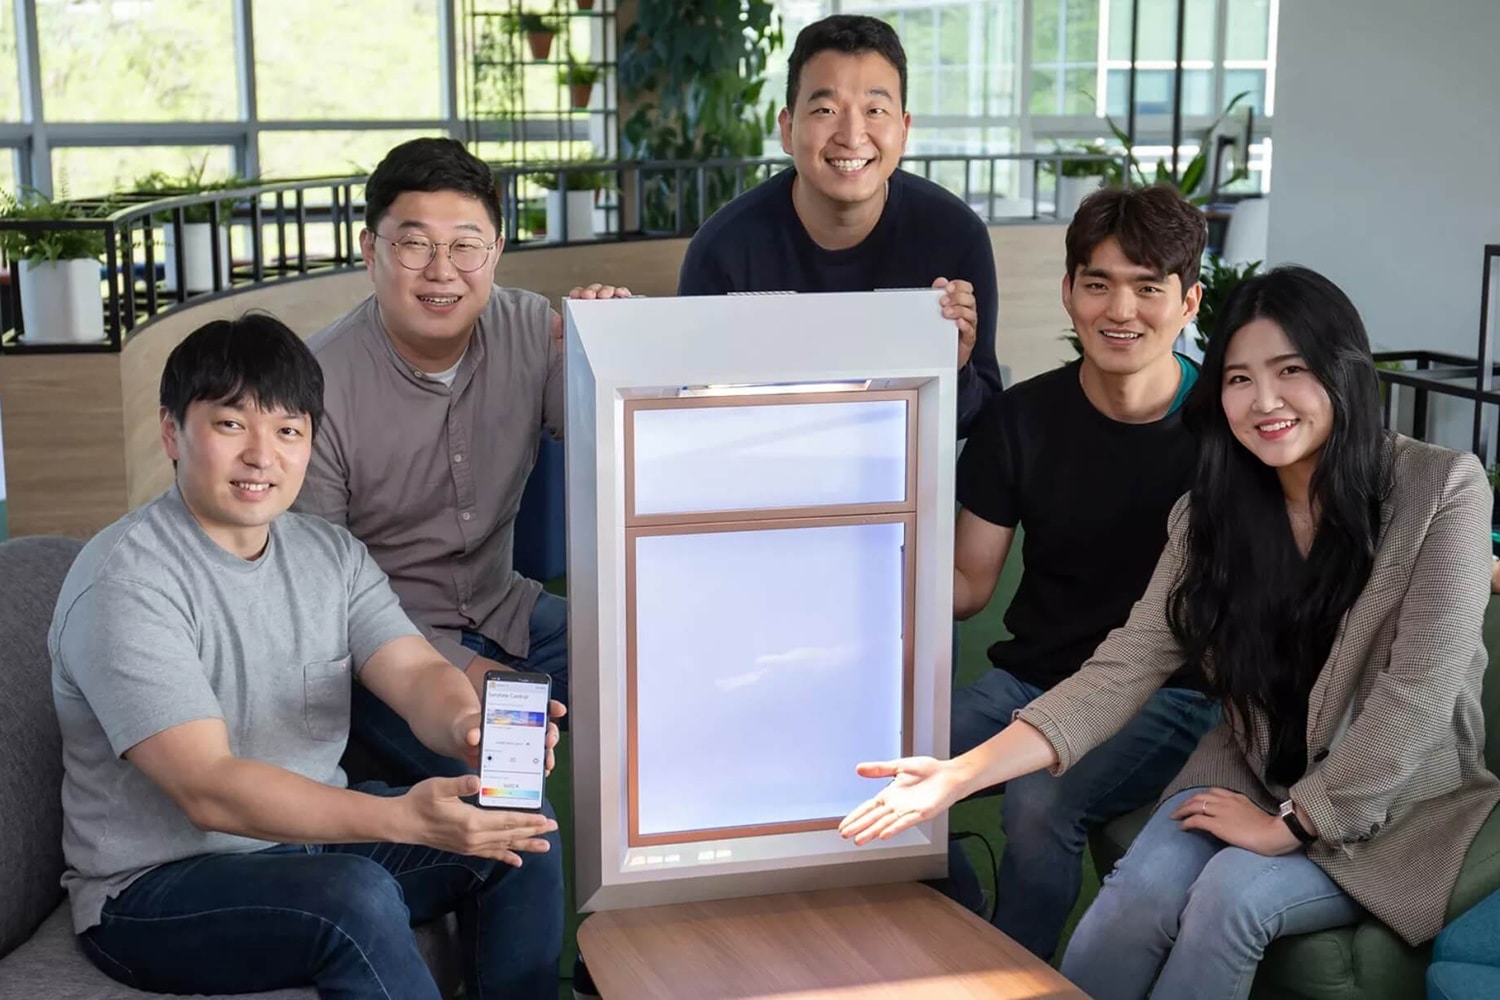 The SunnyFive team with their window that can generate artificial sunlight.